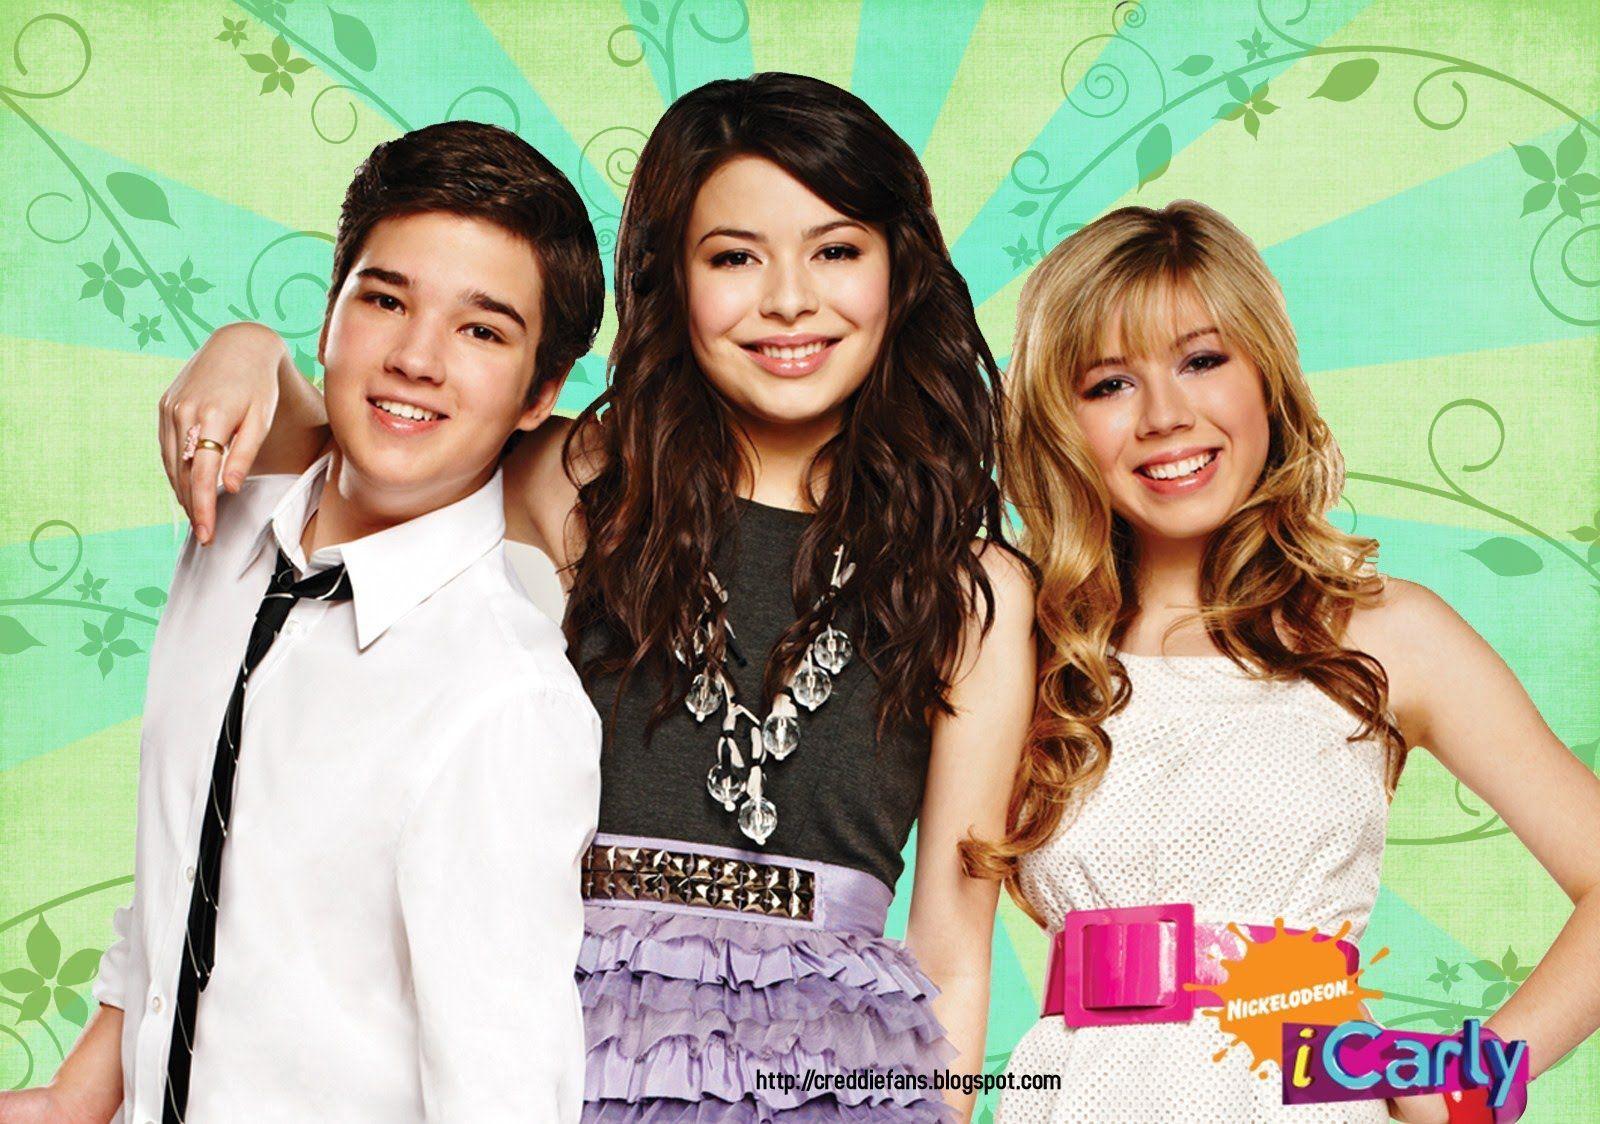 Icarly Wallpaper 70 pictures